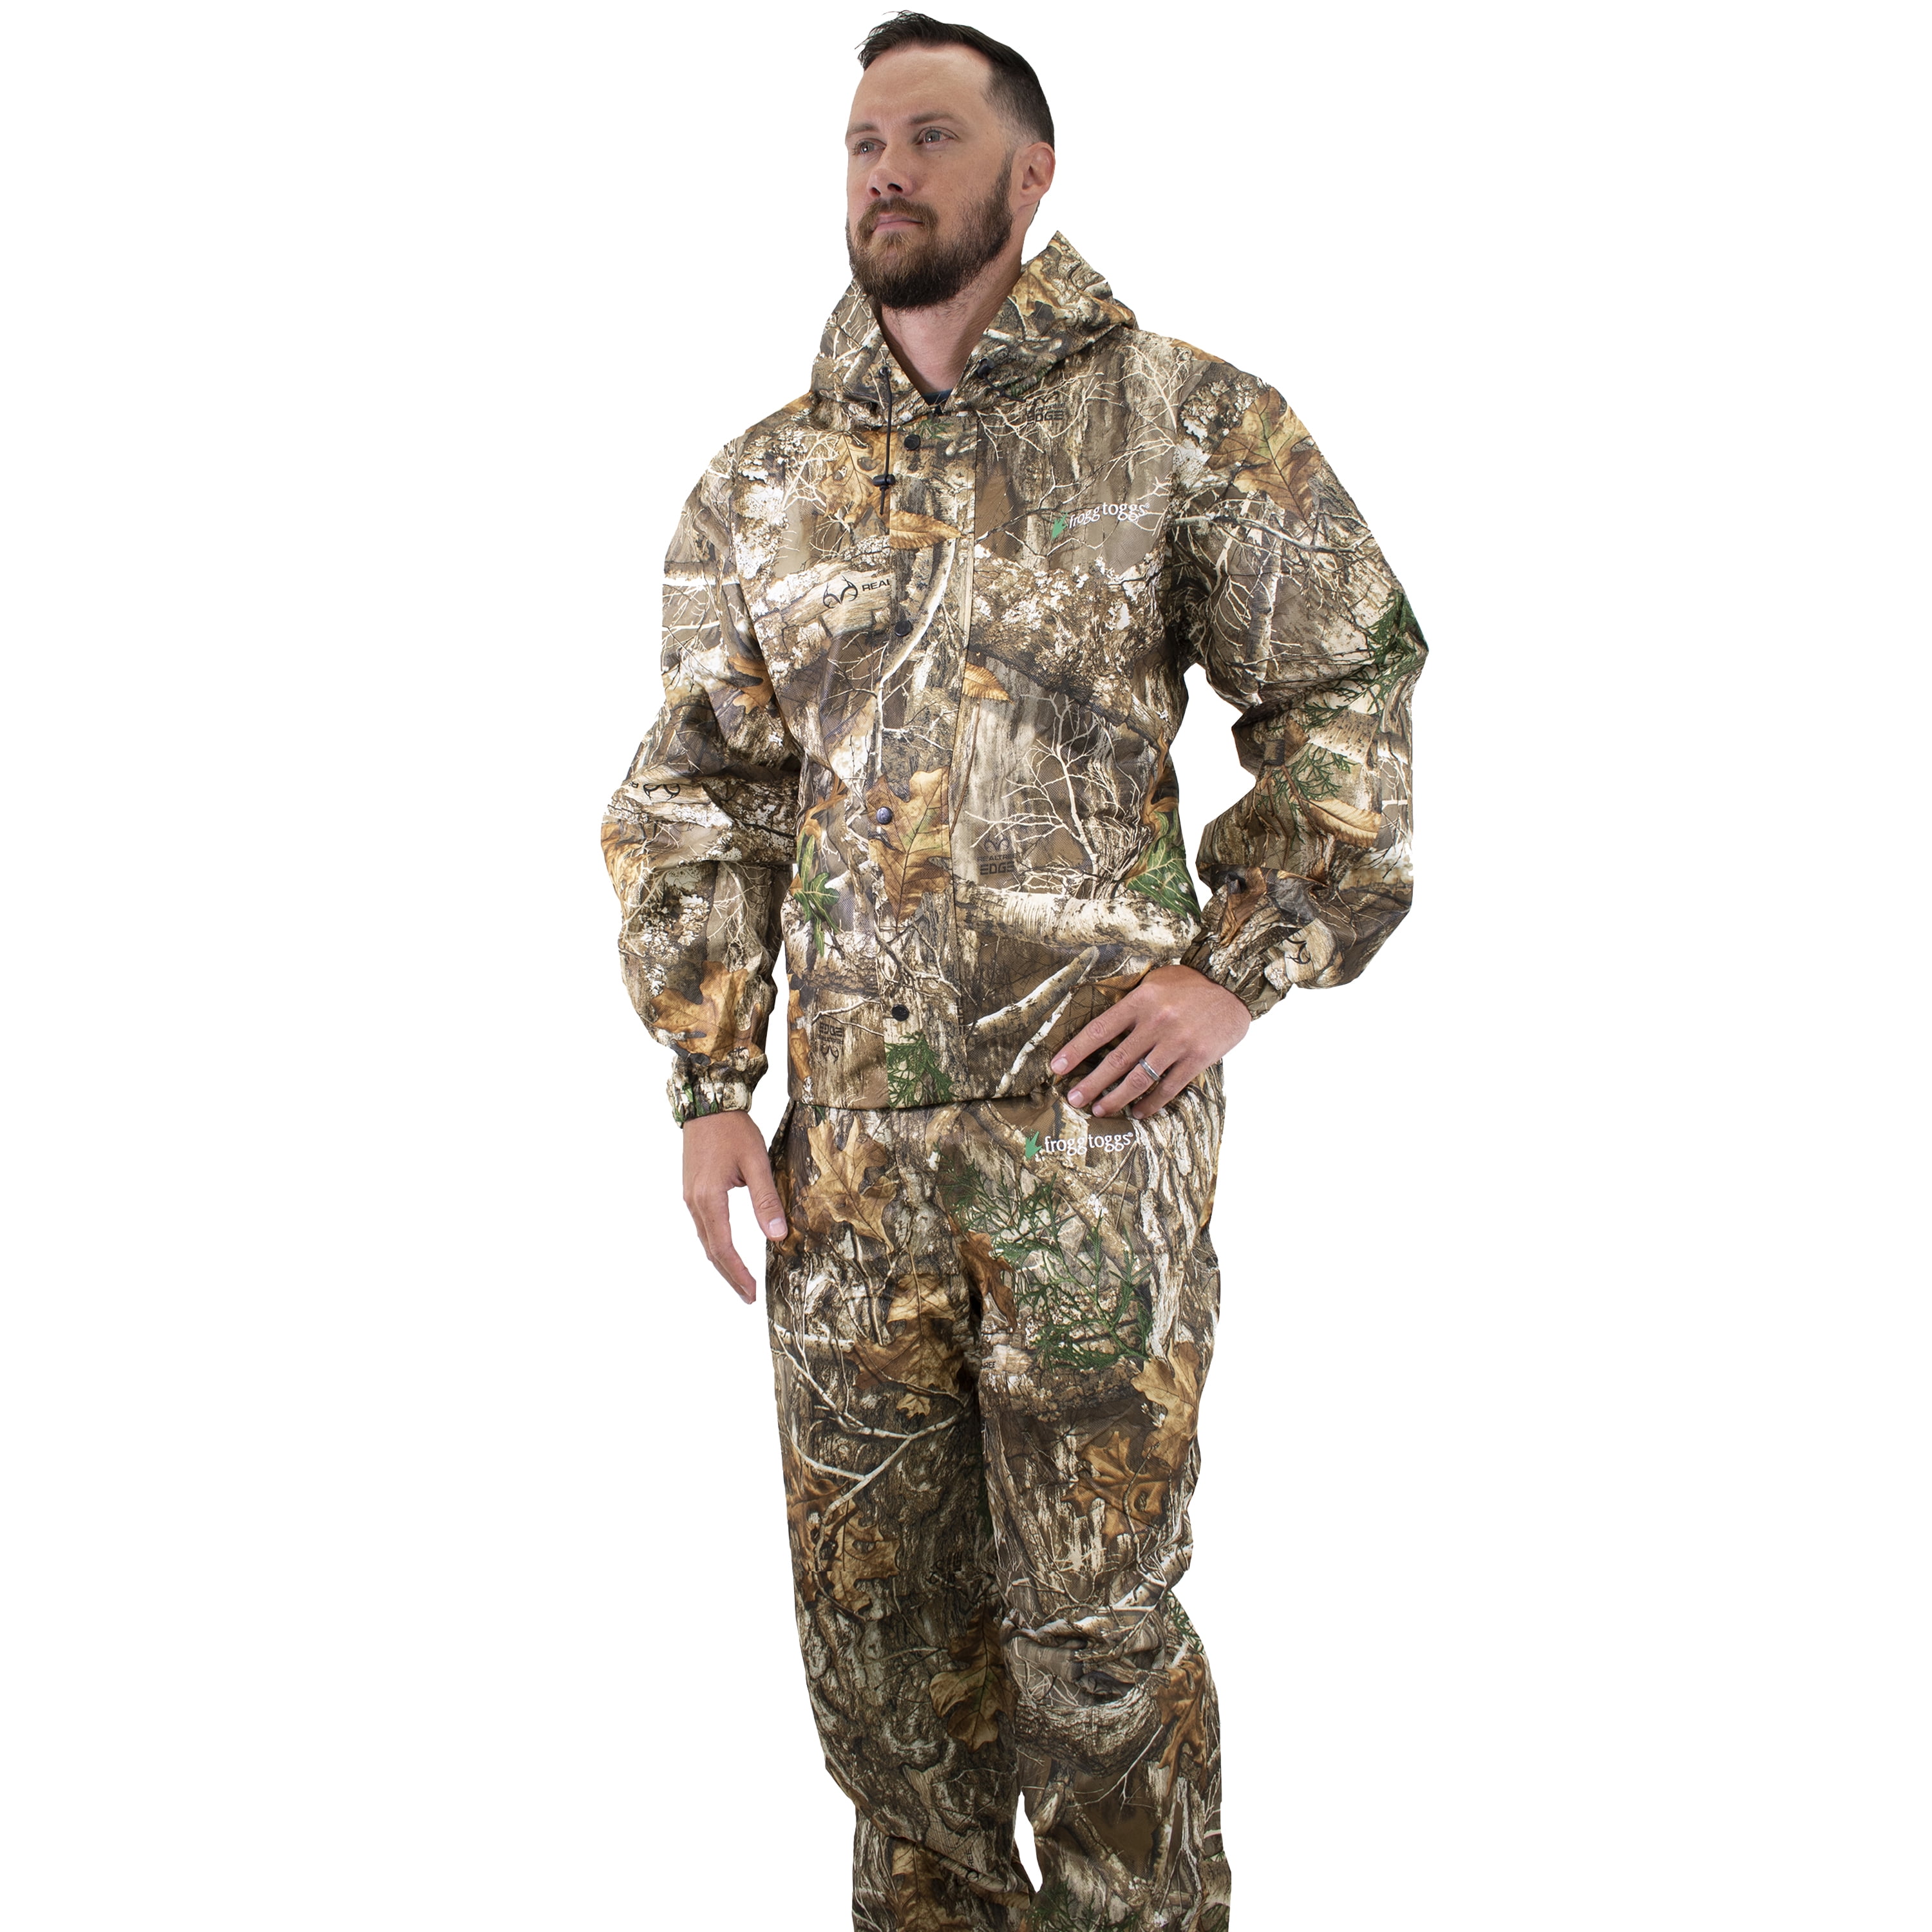 Frogg Toggs All Purpose Men's Adult Camo Rain Jacket and Pant, XL/2X